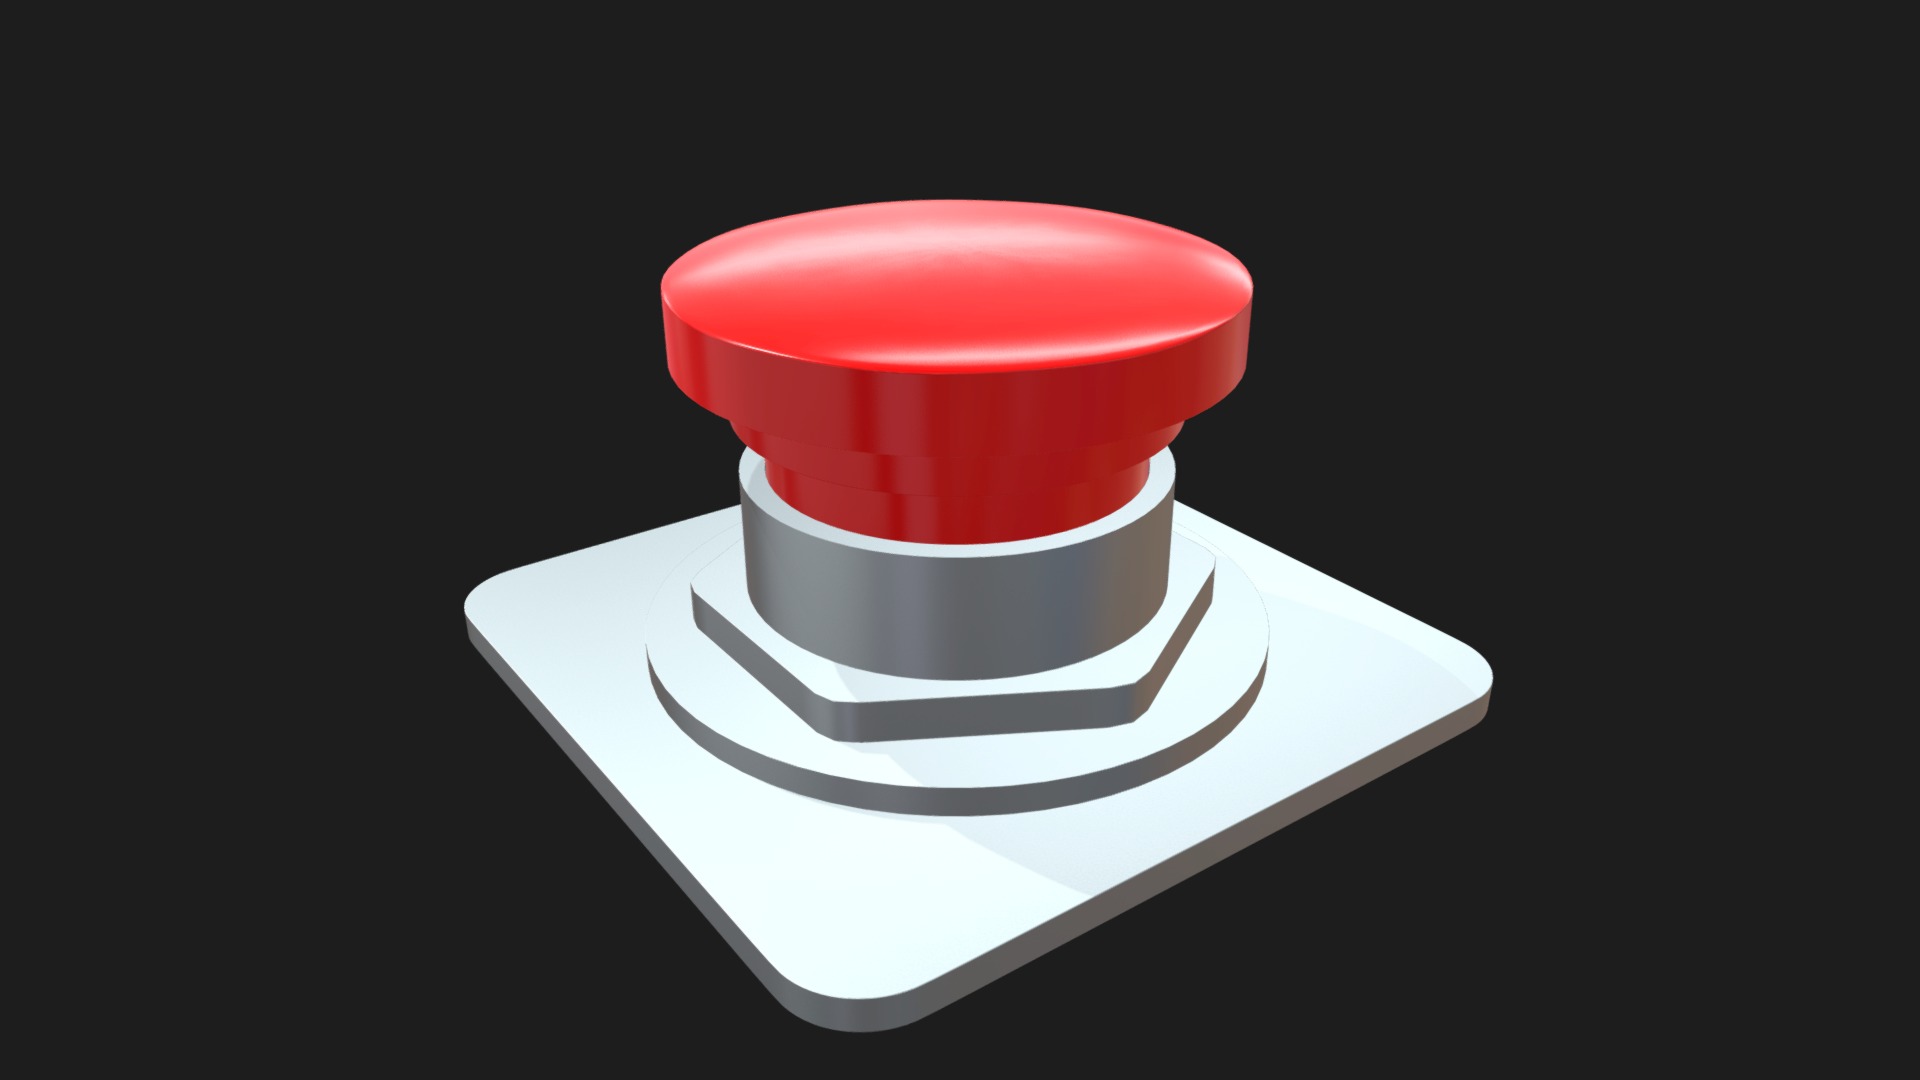 3D model Red button - This is a 3D model of the Red button. The 3D model is about a stack of paper towels.